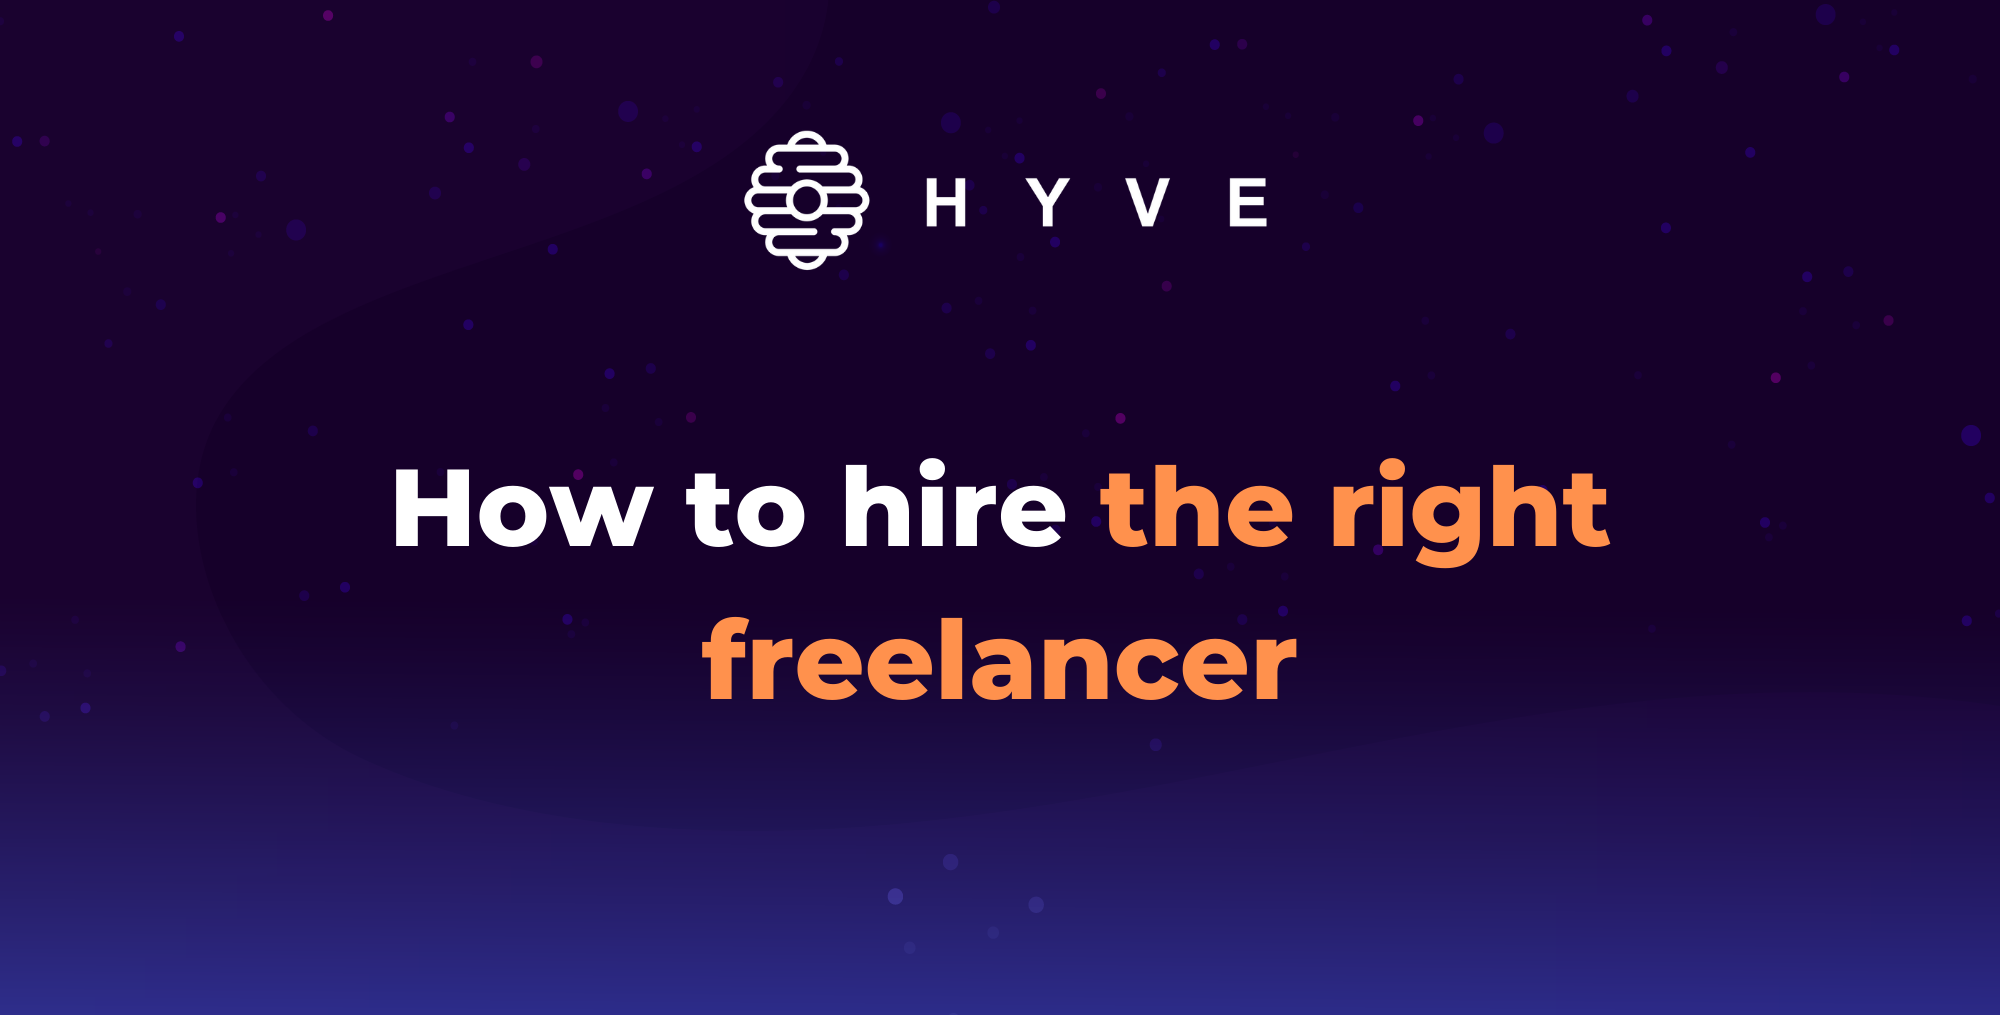 How to hire the right freelancer